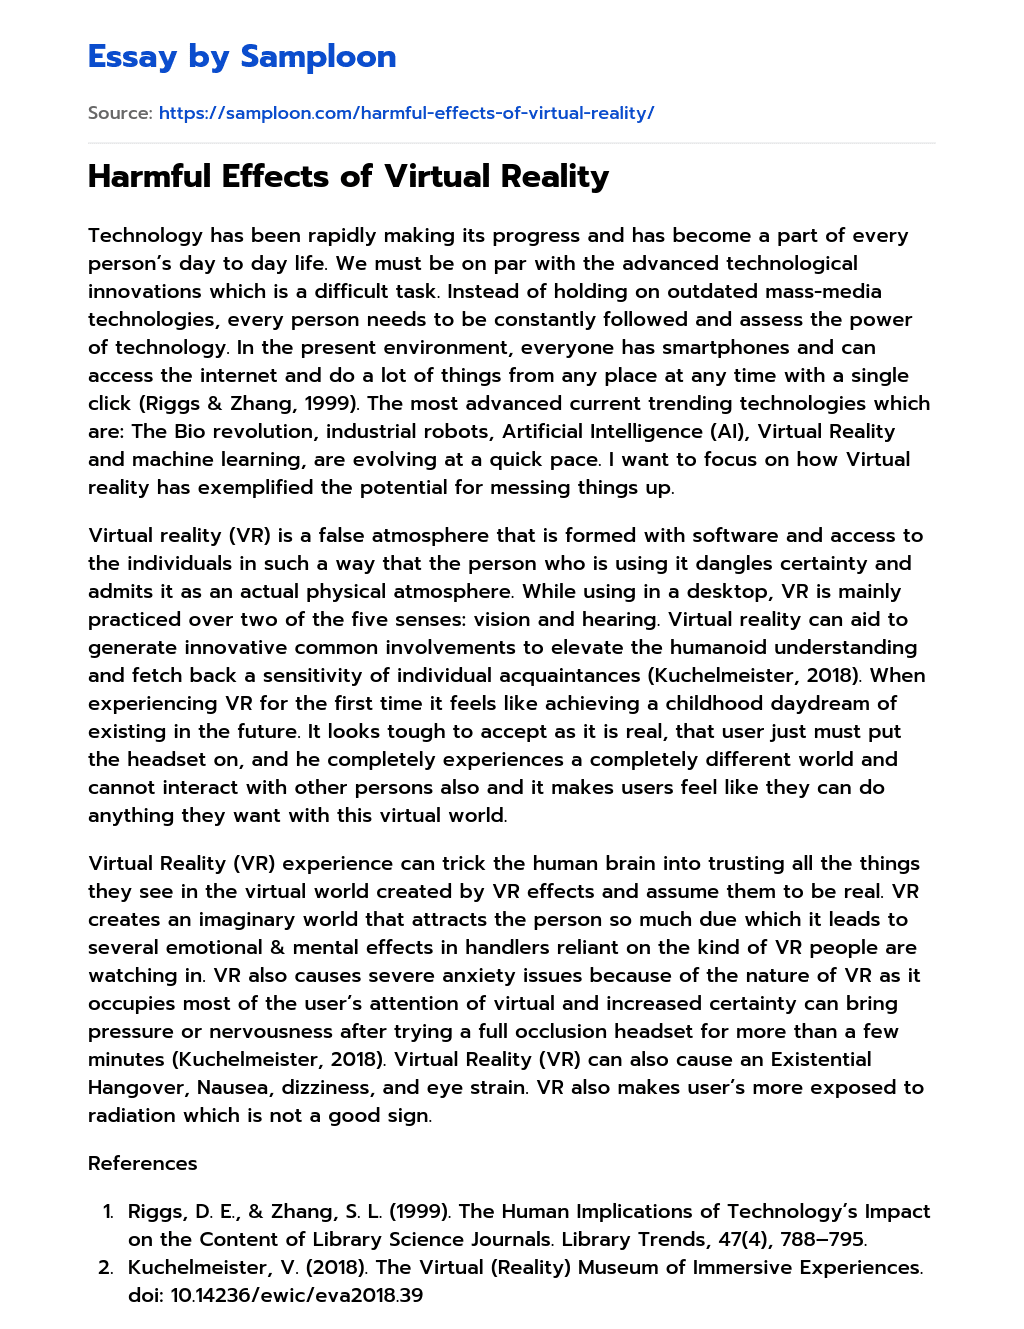 Harmful Effects of Virtual Reality essay